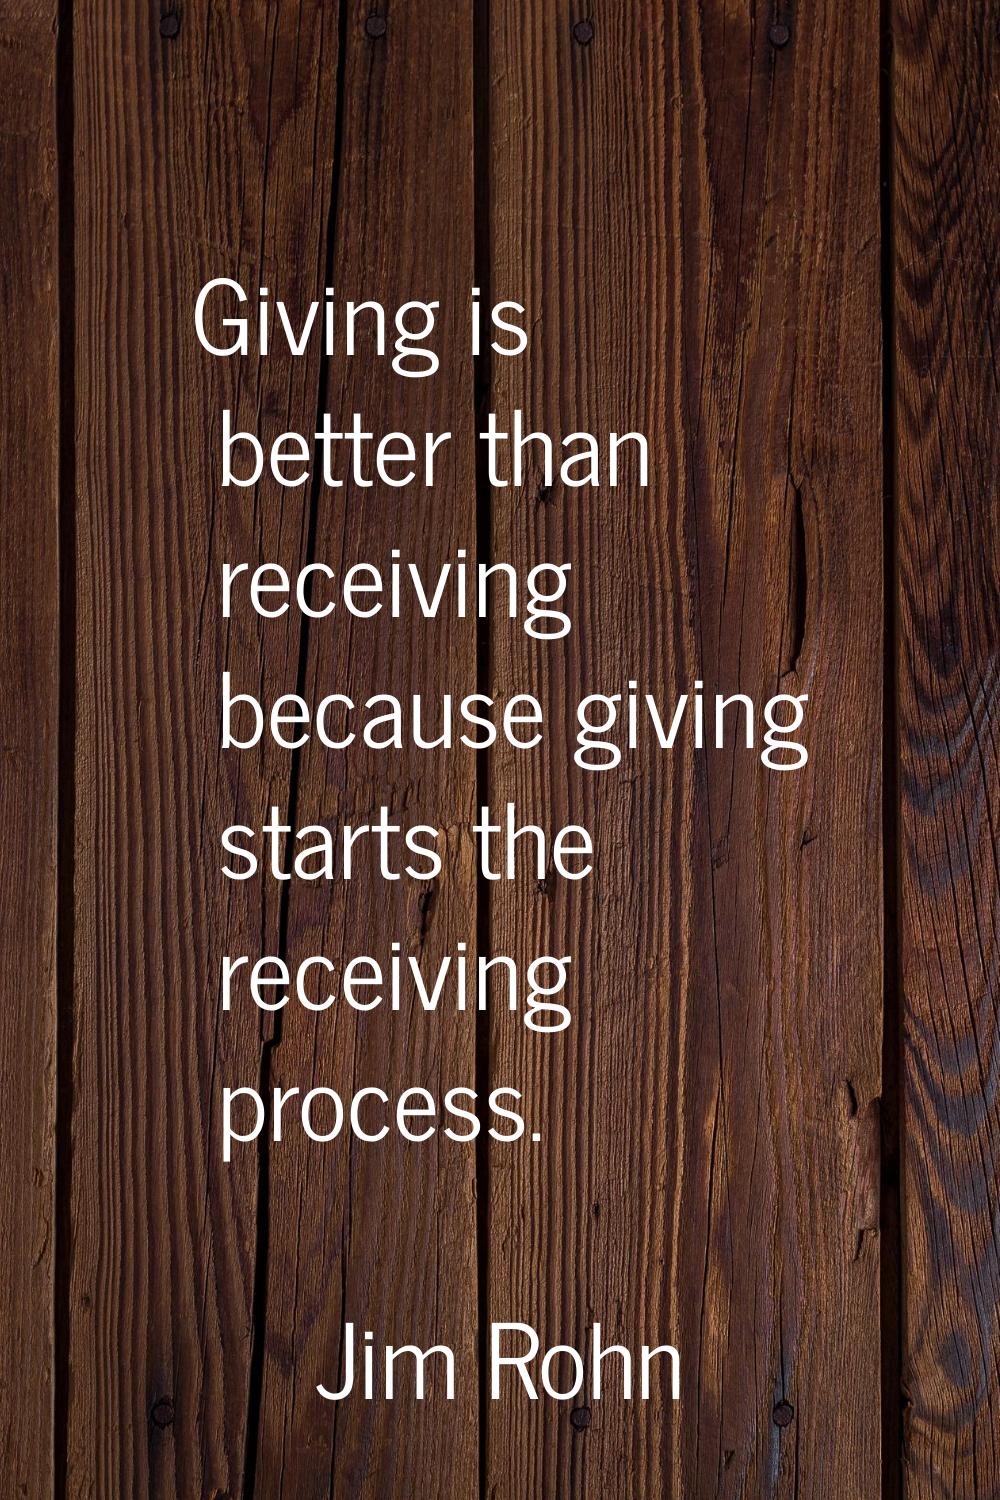 Giving is better than receiving because giving starts the receiving process.